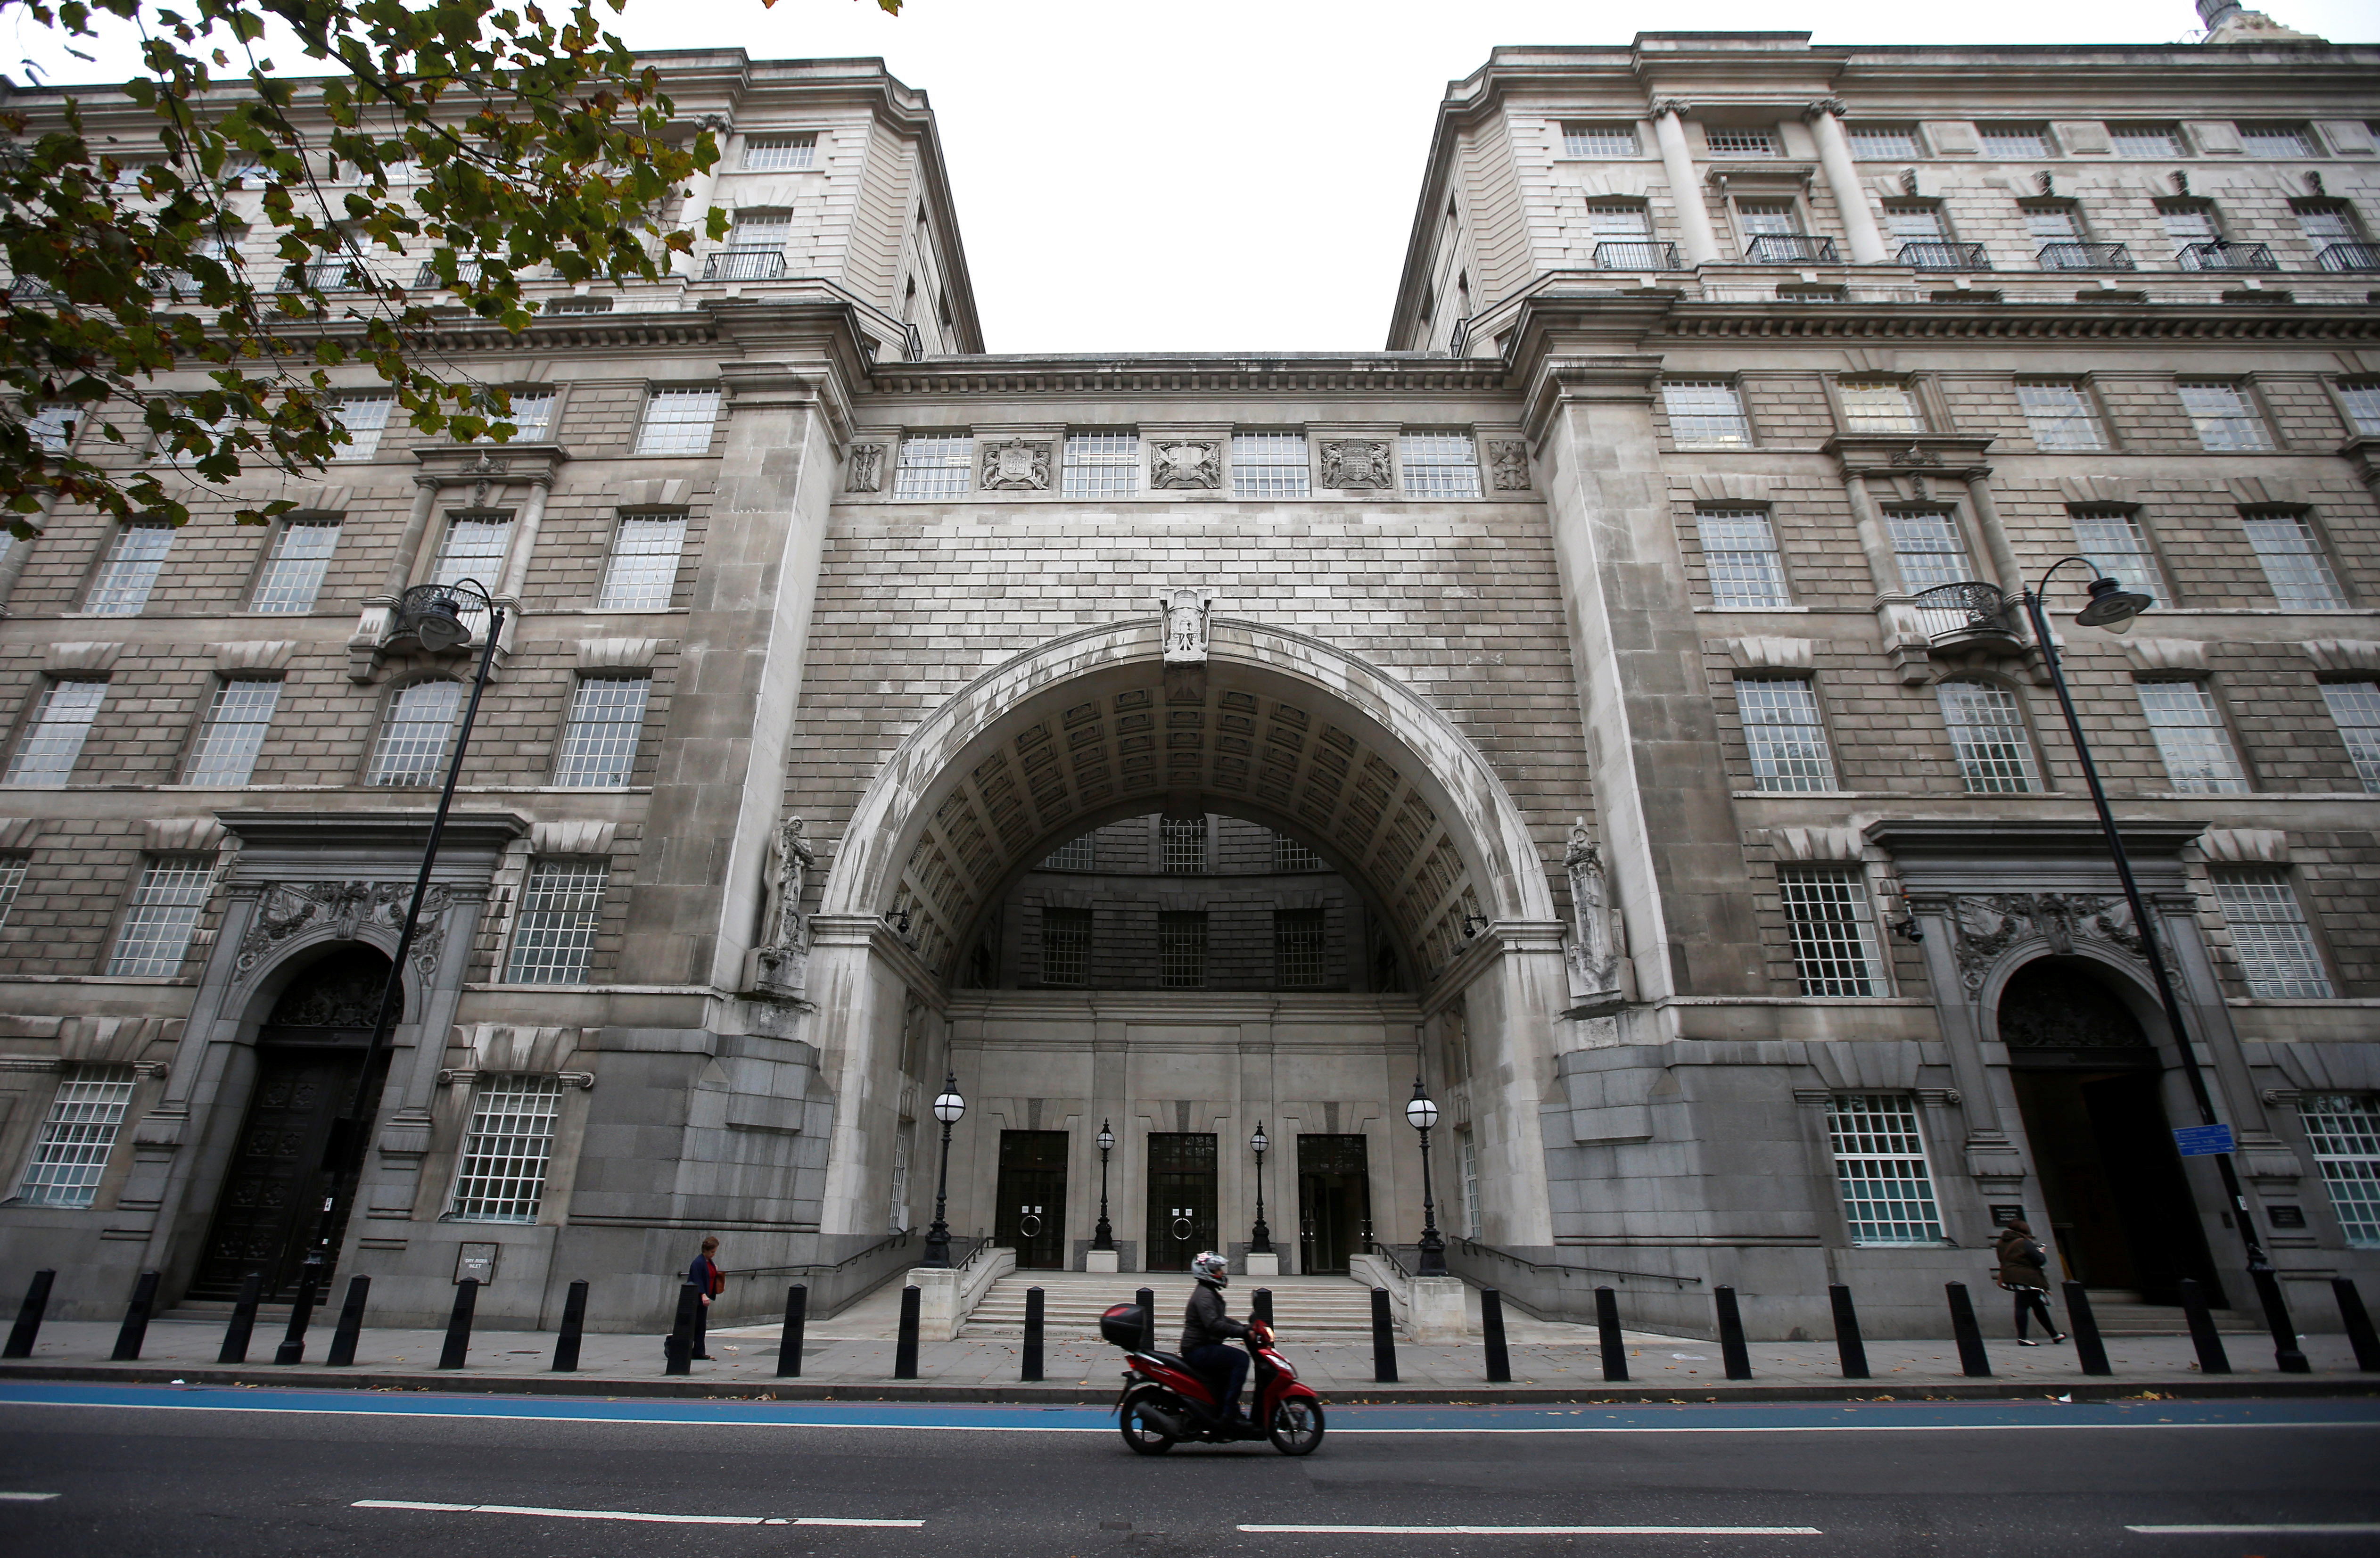 Thames House, the headquarters of the British Security Service (MI5) is seen in London